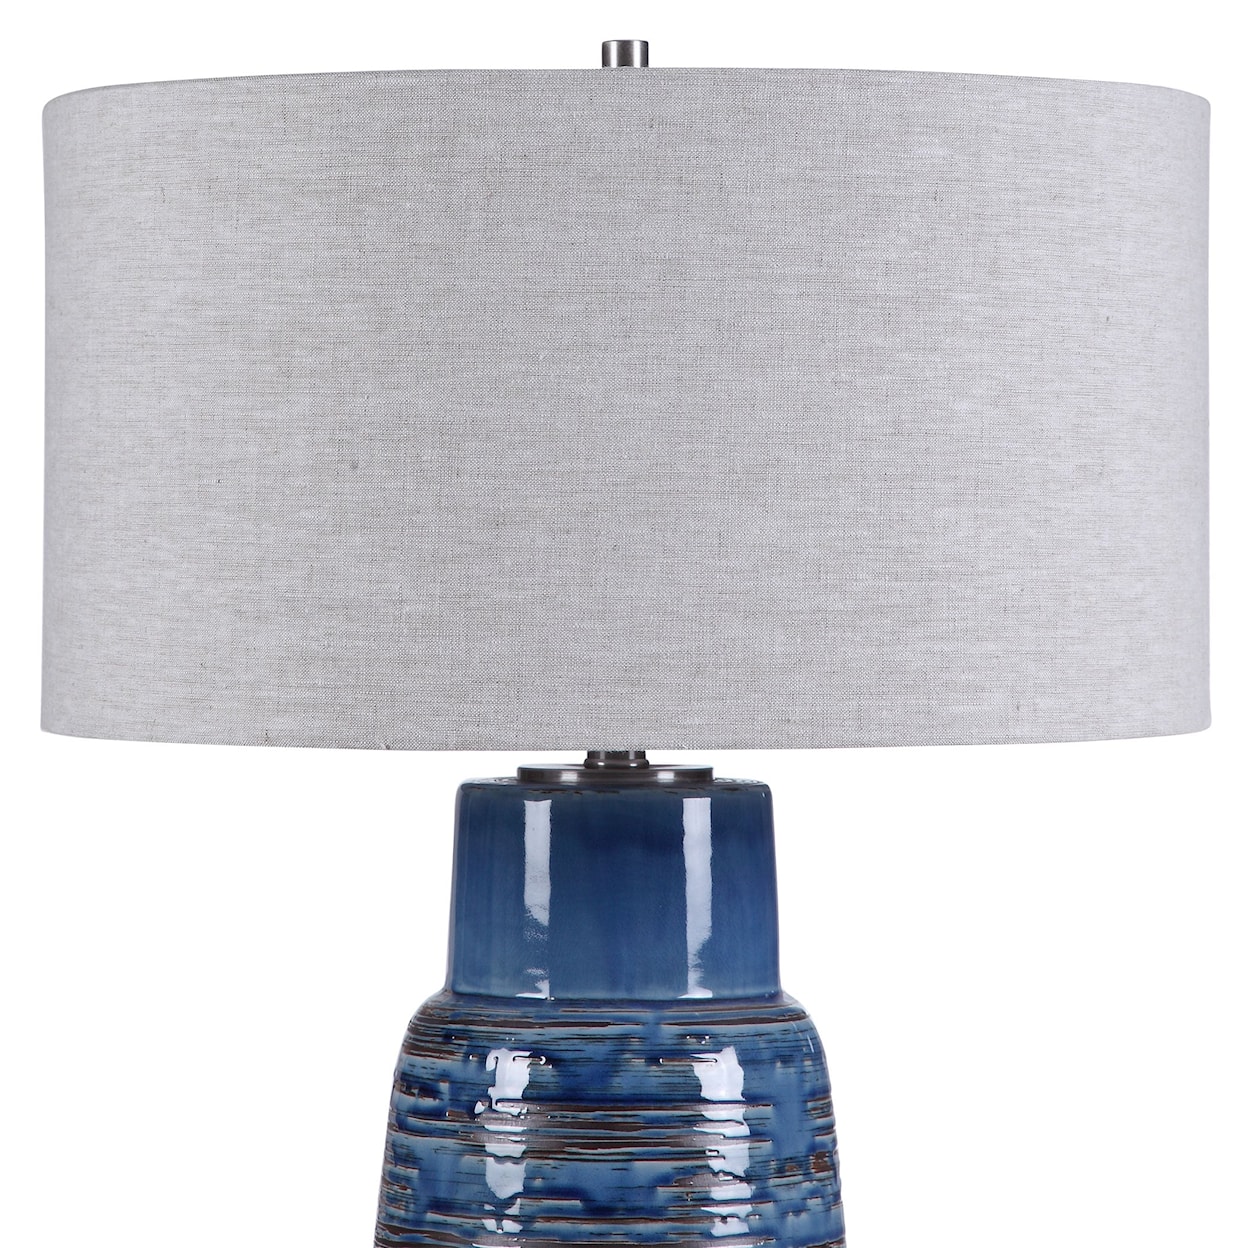 Uttermost Table Lamps Magellan Blue Table Lamp